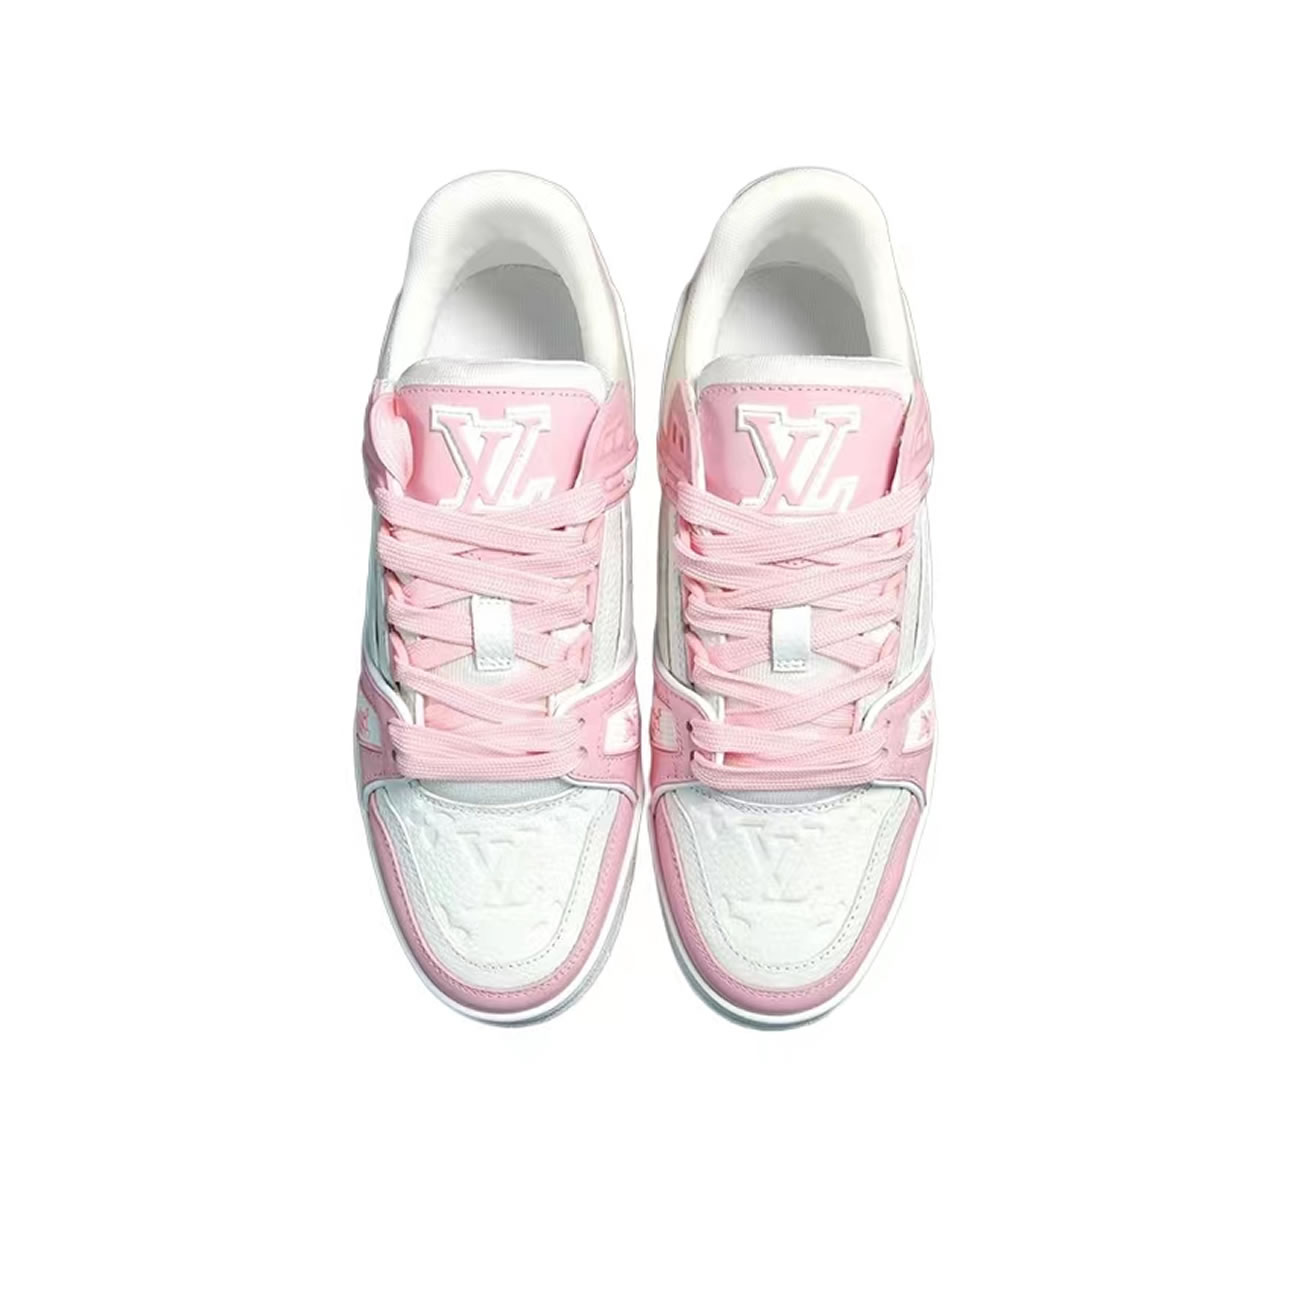 Lv Trainer Vuitton Sneaker Pink 1aa6w3 (3) - newkick.org